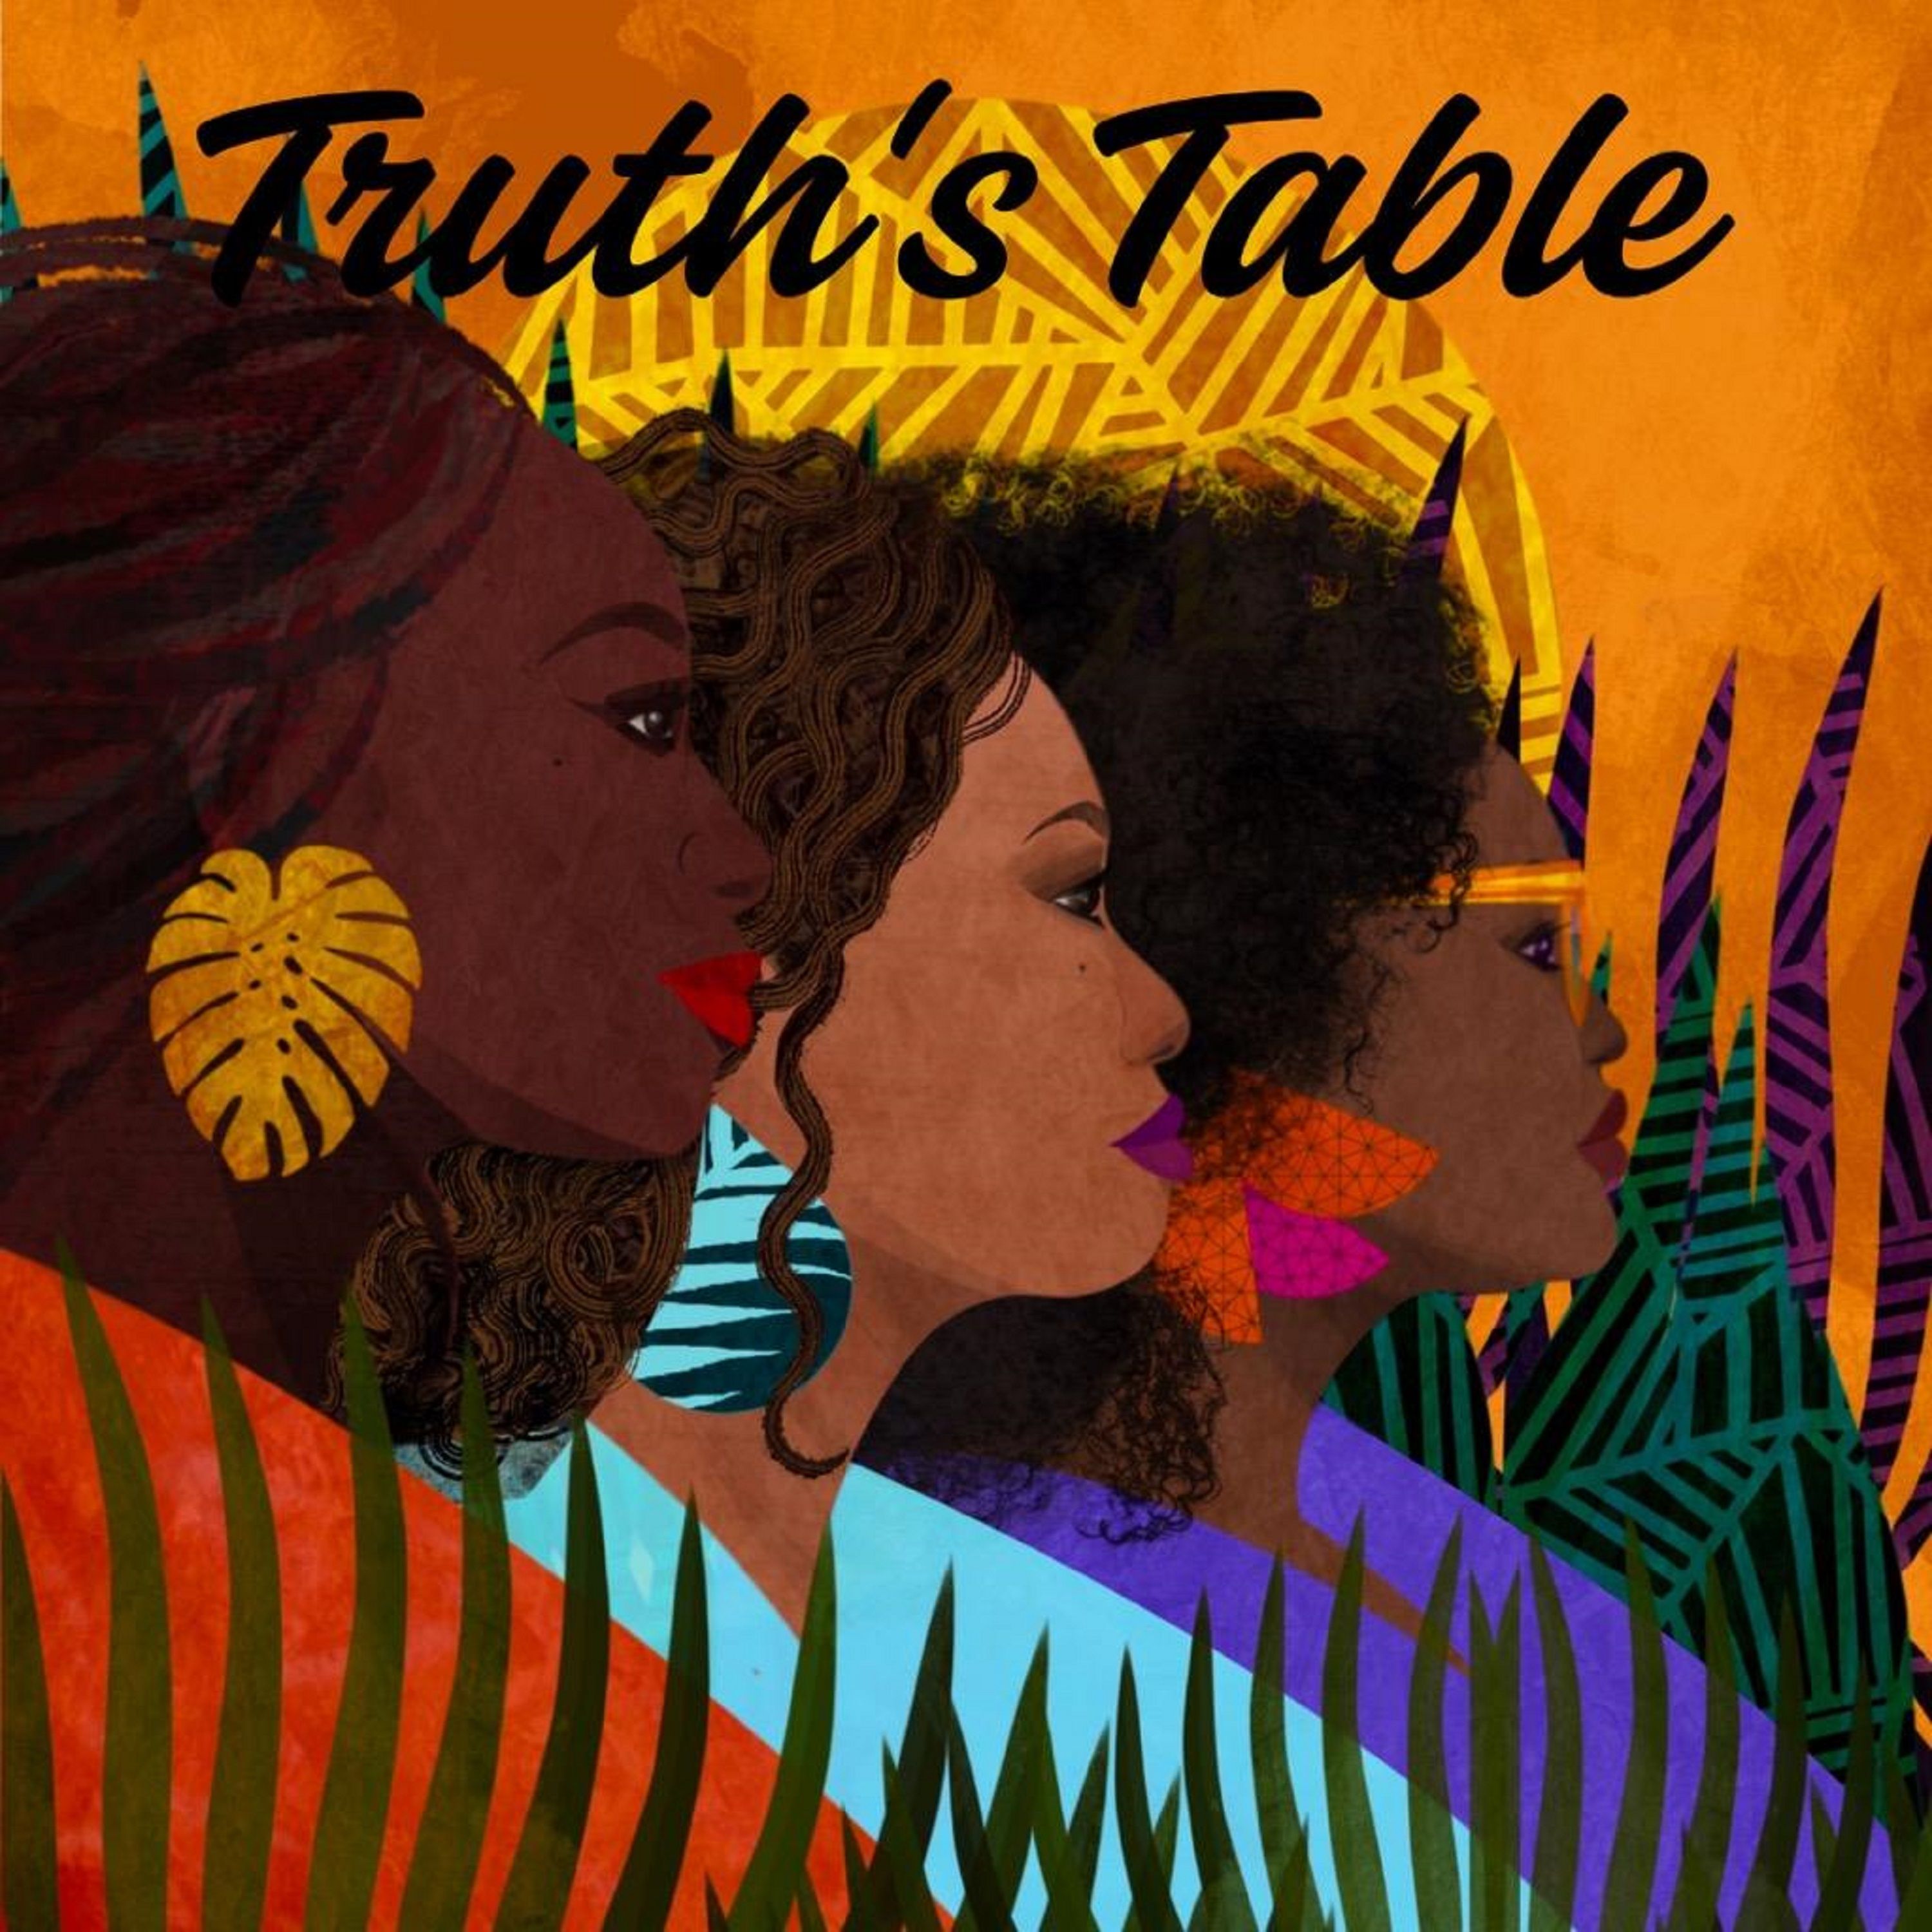 COMING SOON: Get in The Word with Truth's Table